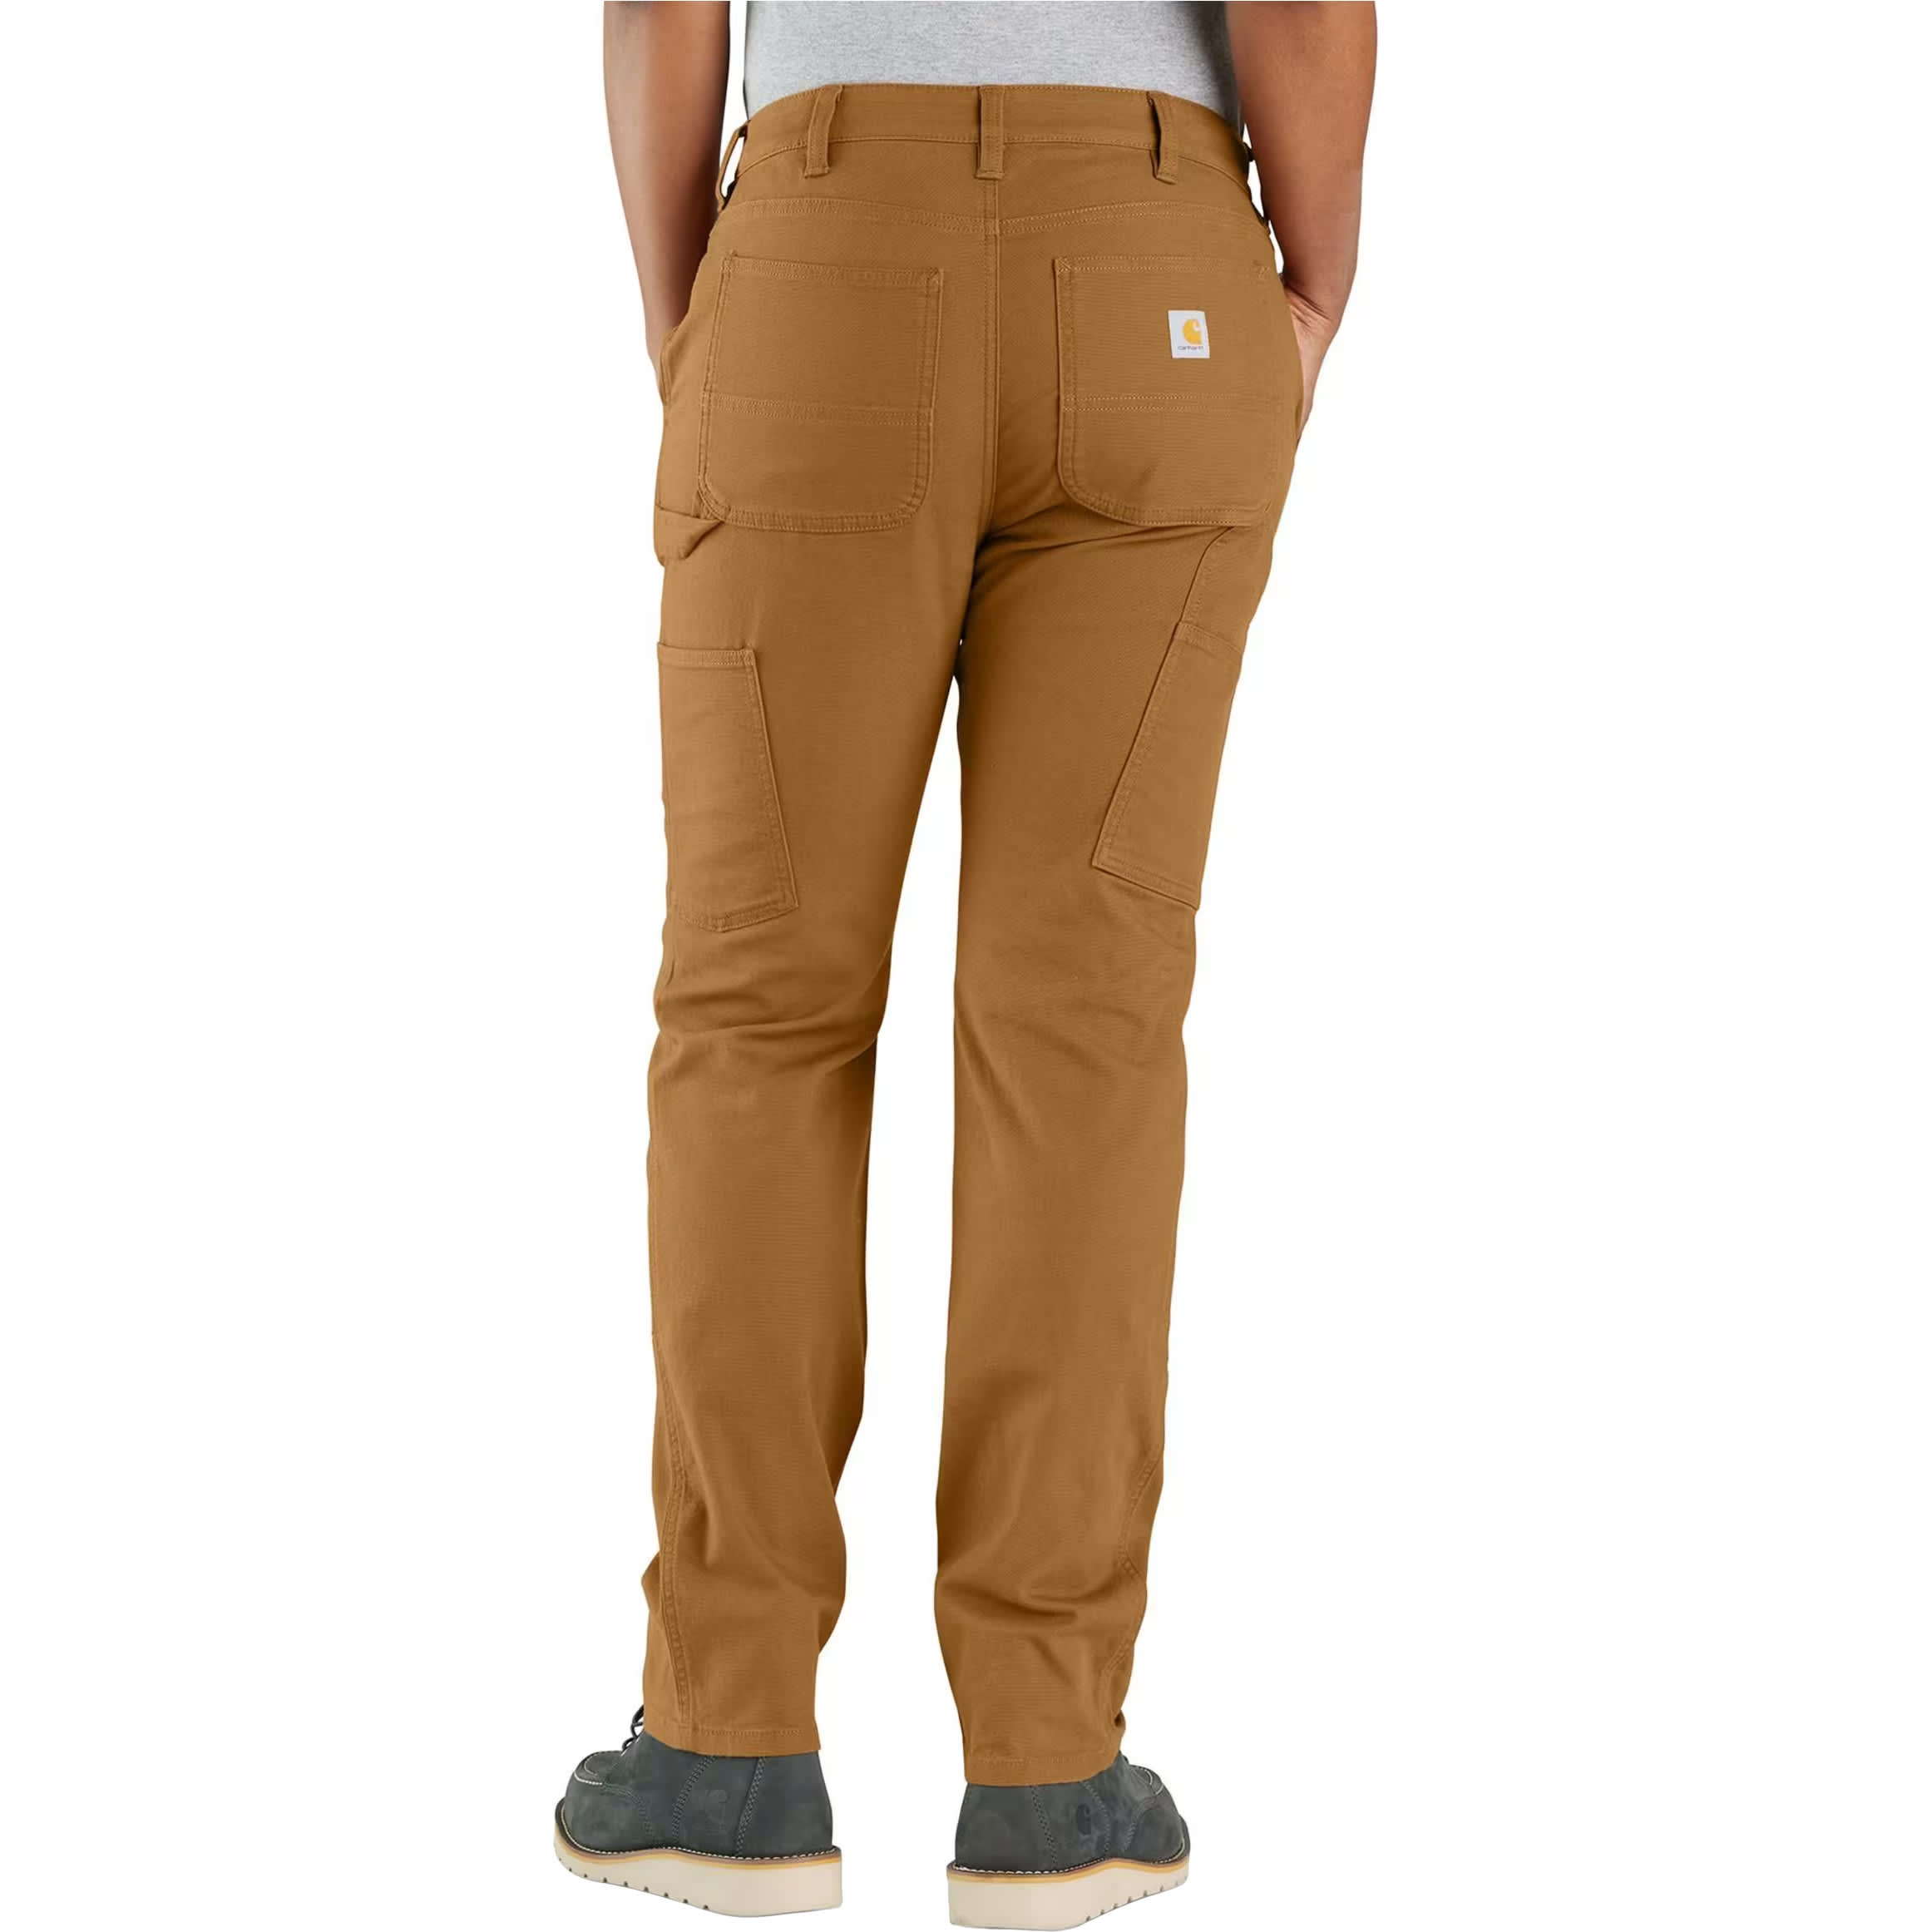 CARHARTT Women's Relaxed Fit Canvas Pant